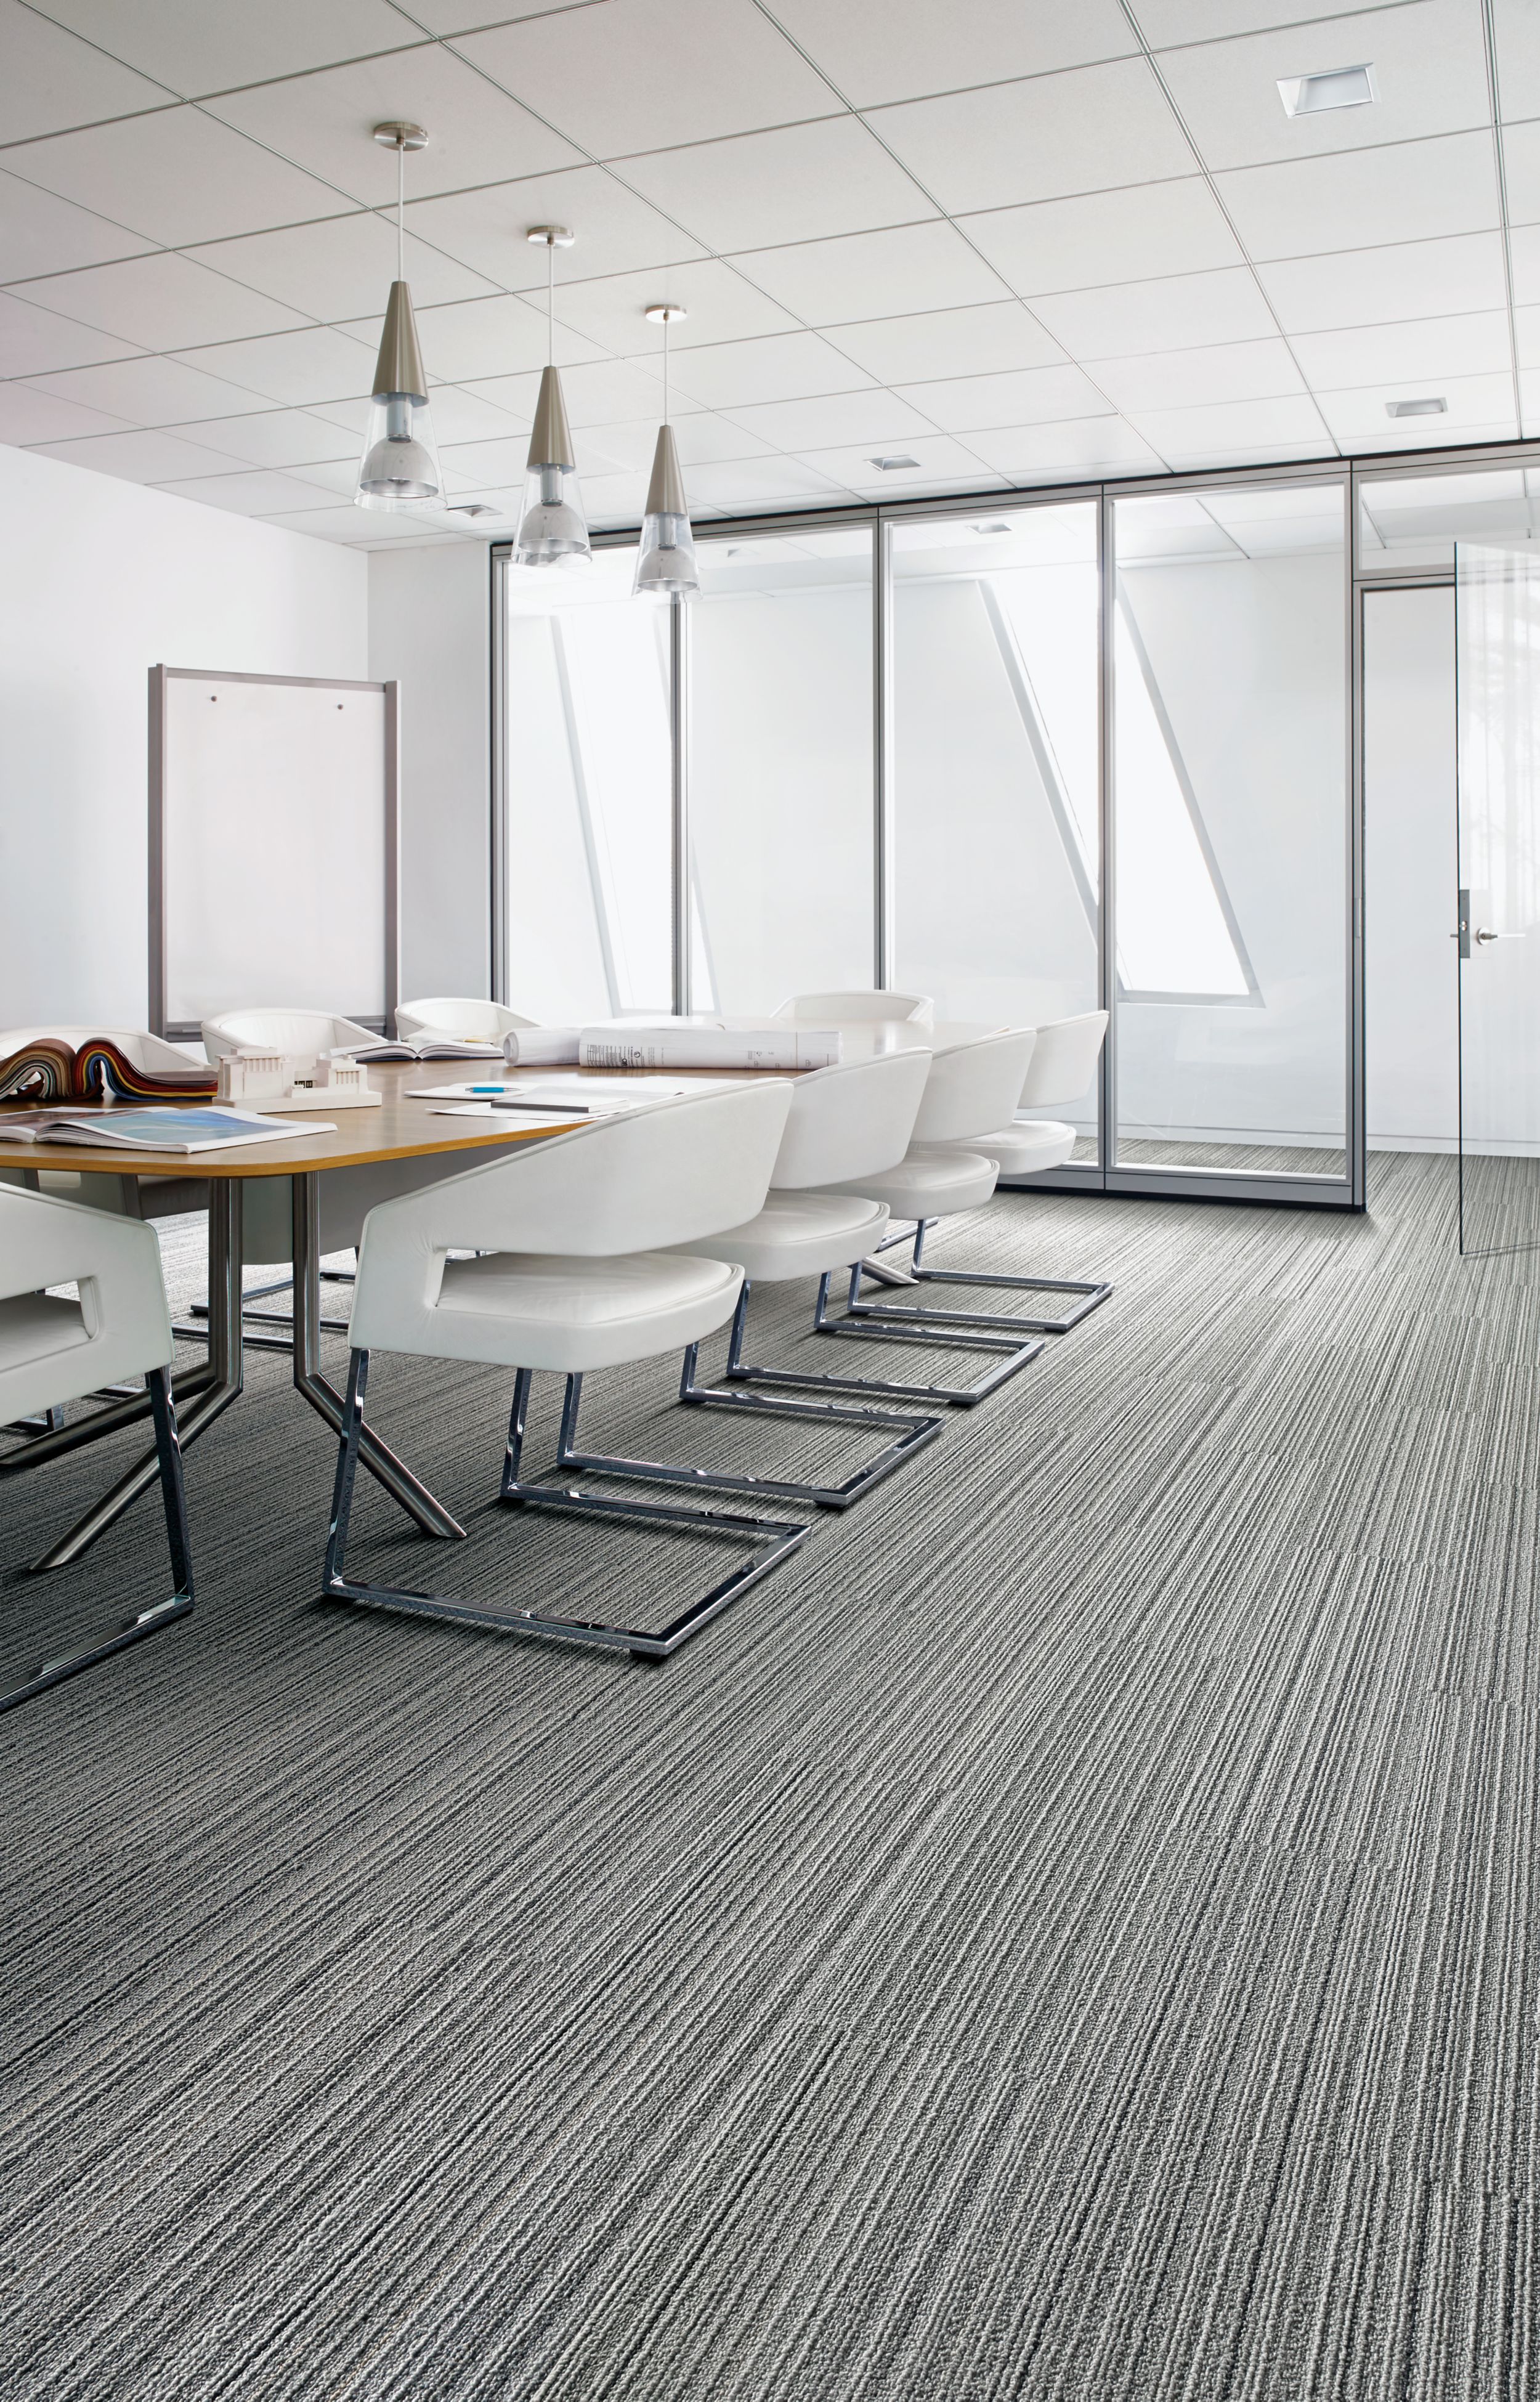 Interface SL920 plank carpet tile in meeting area with table and white chairs image number 1